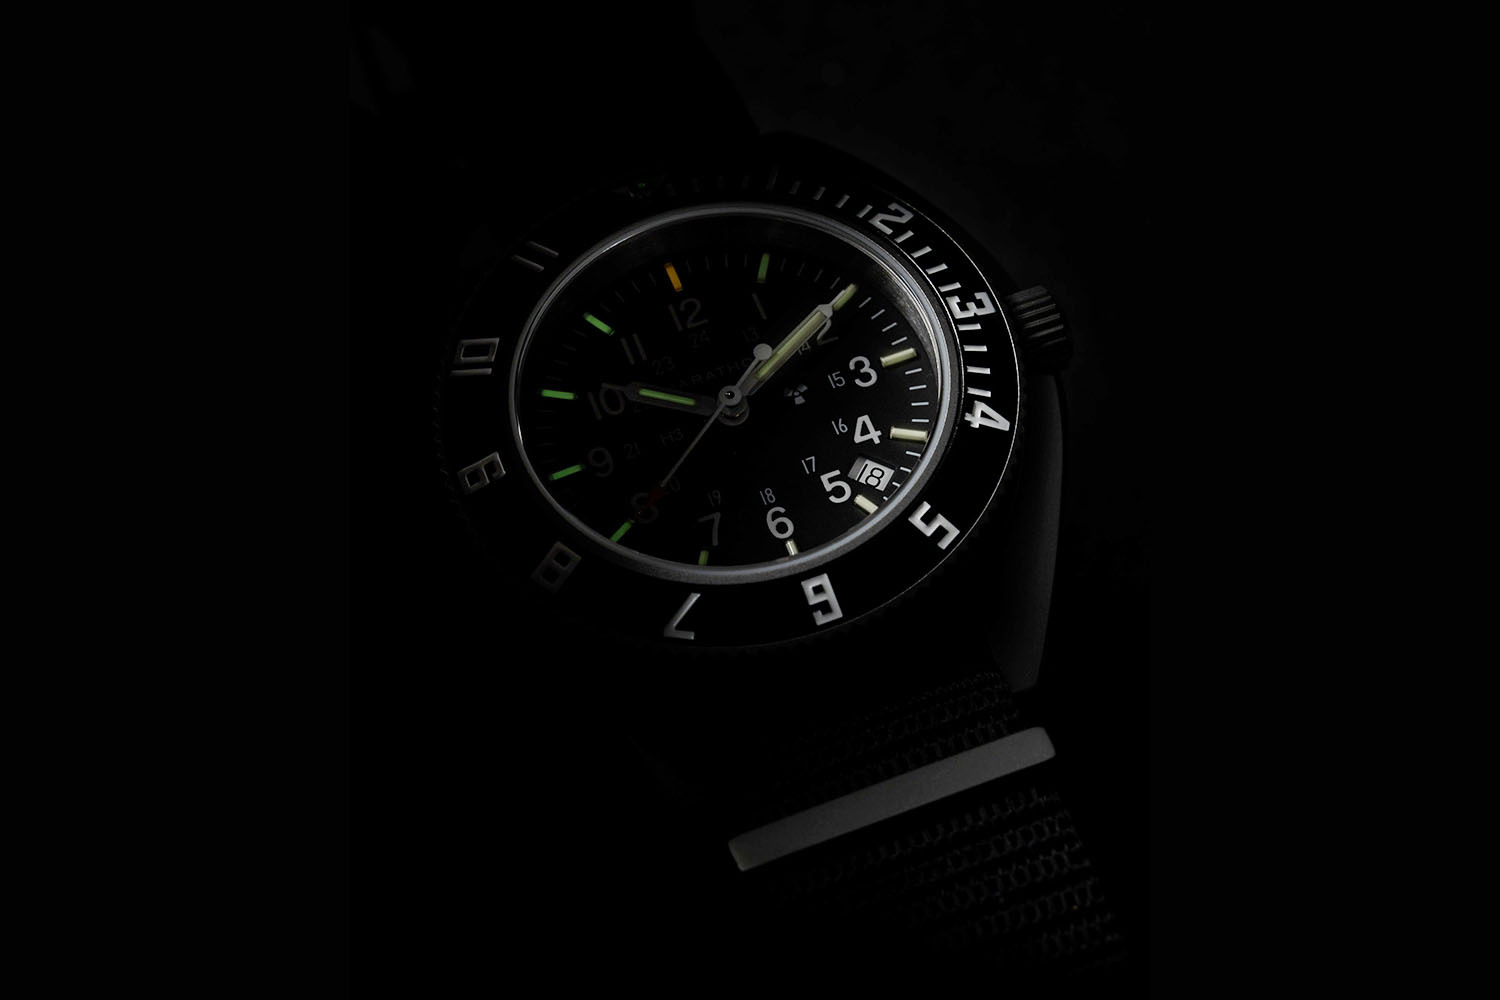 A darkened image with parts of a watch 